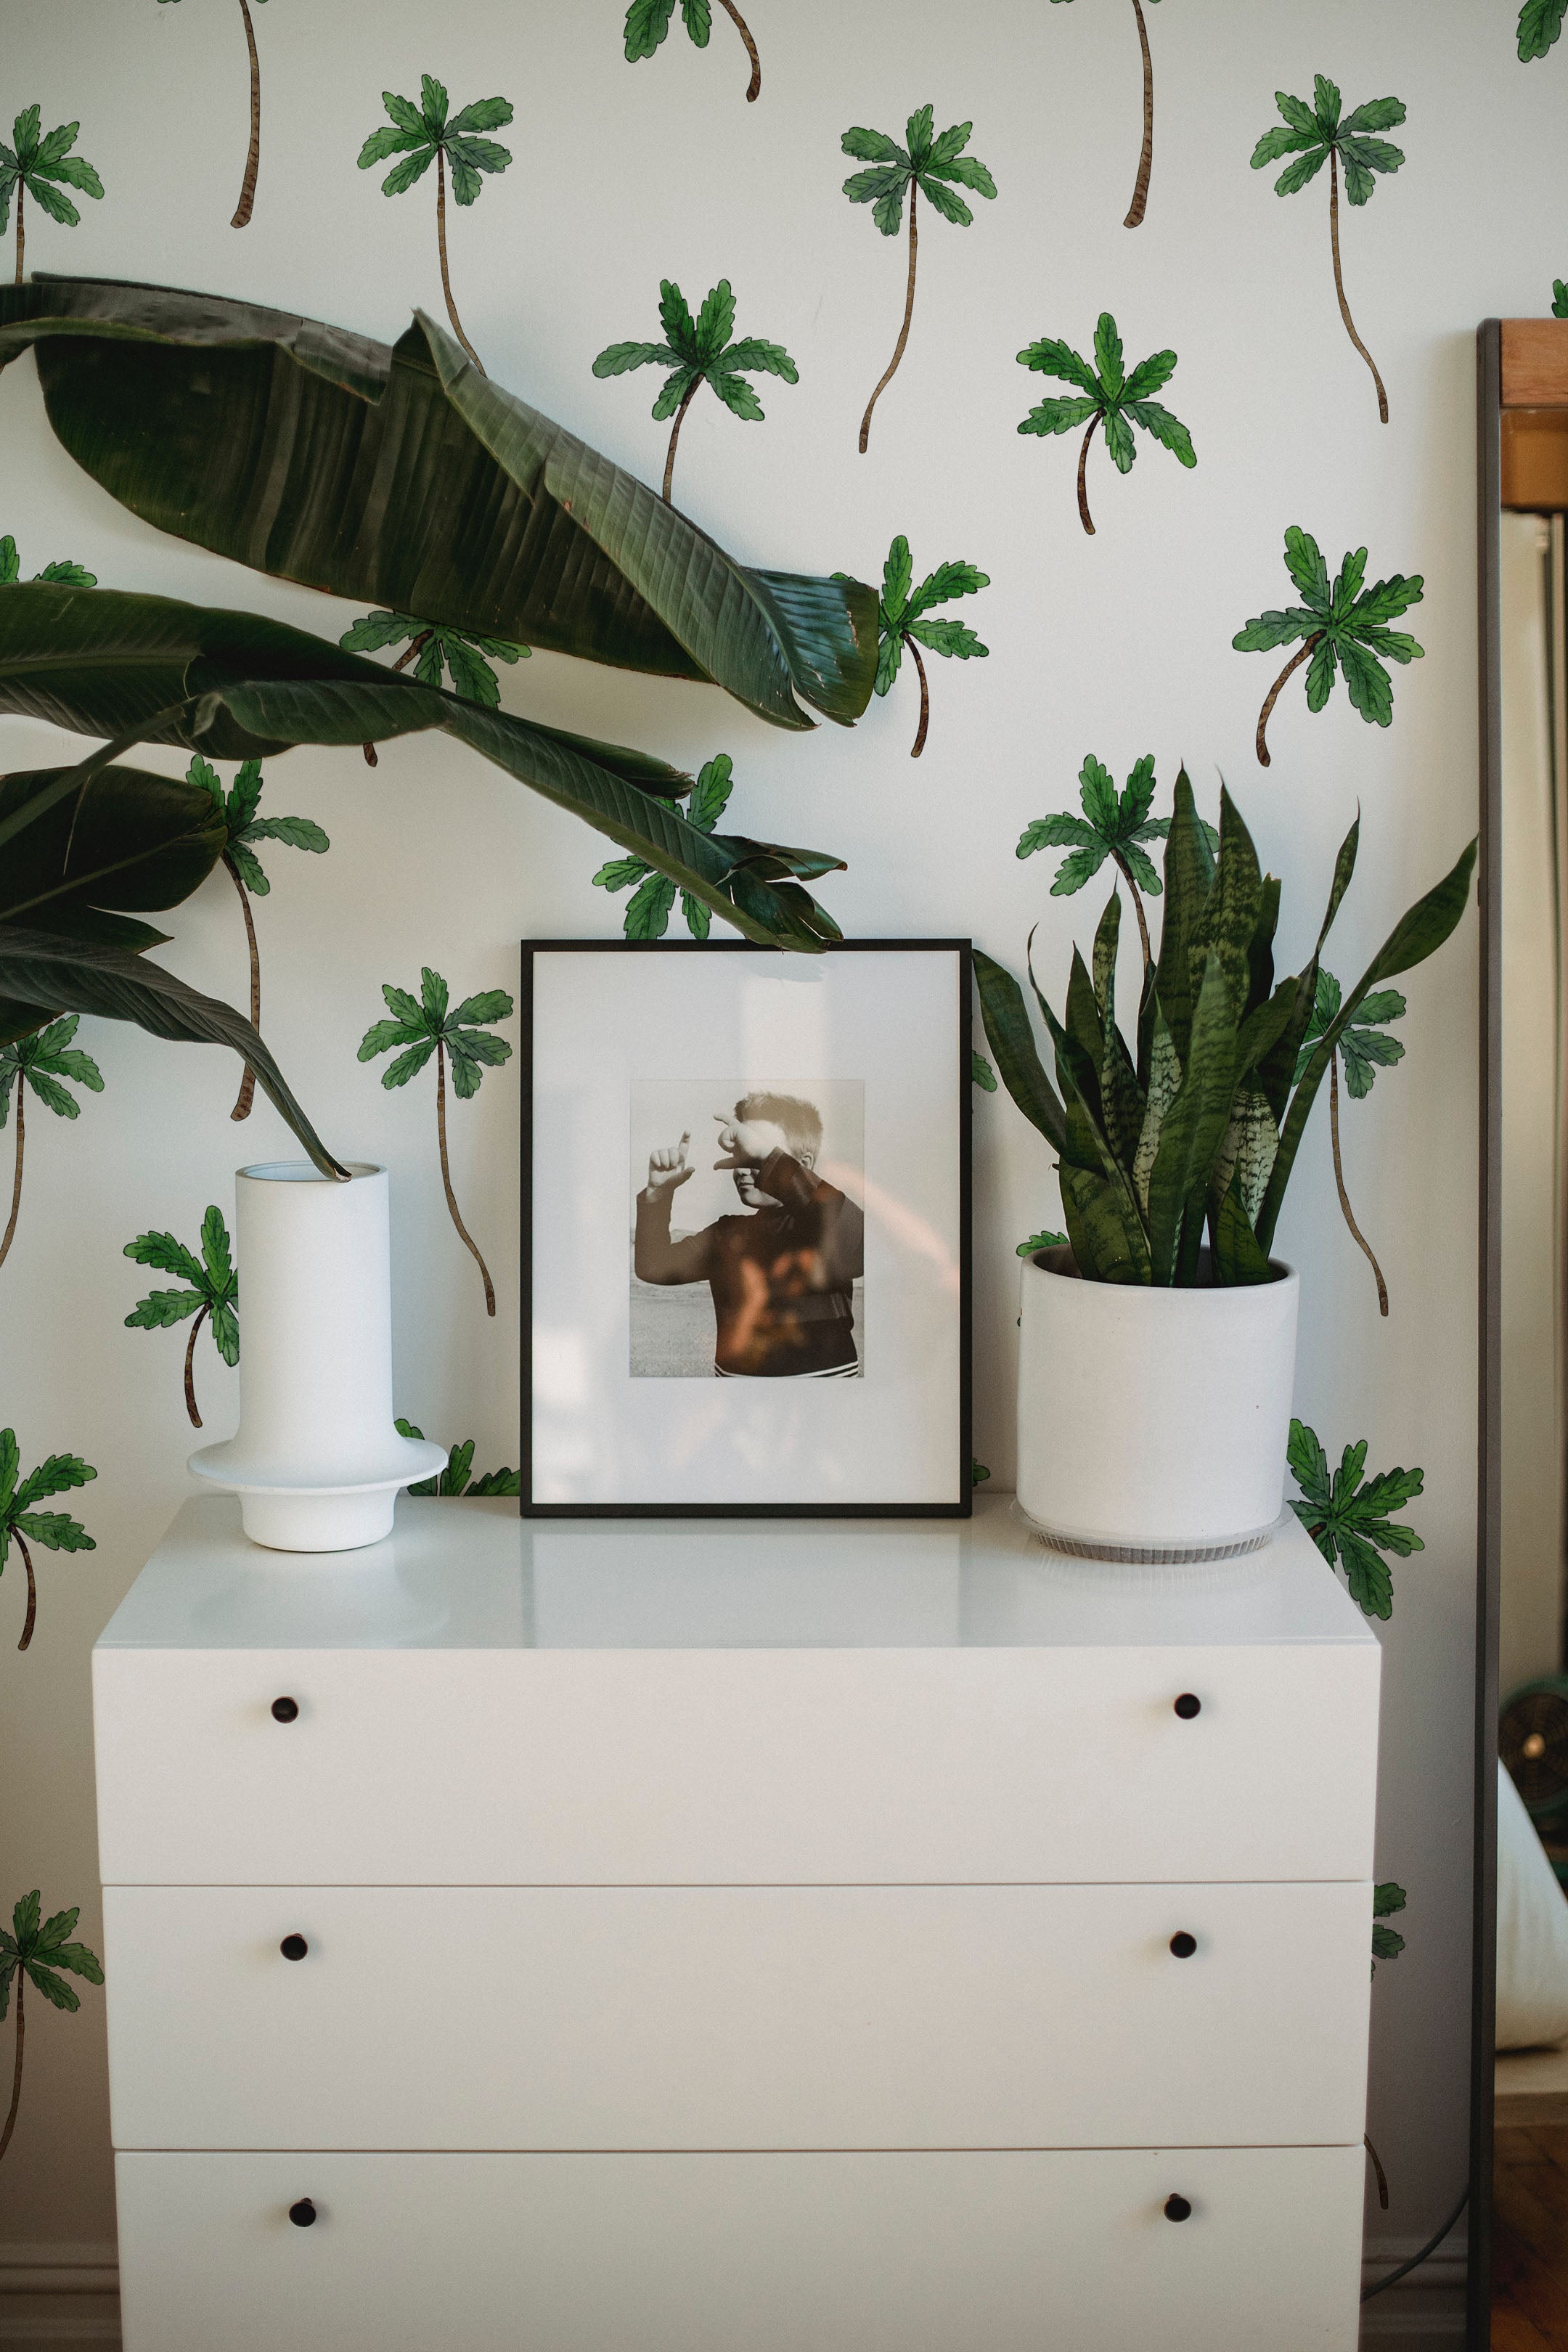 A stylish dresser area with Island Breeze Wallpaper in the background, adorned with green palm trees. The space features a white dresser, framed artwork, and lush plants.